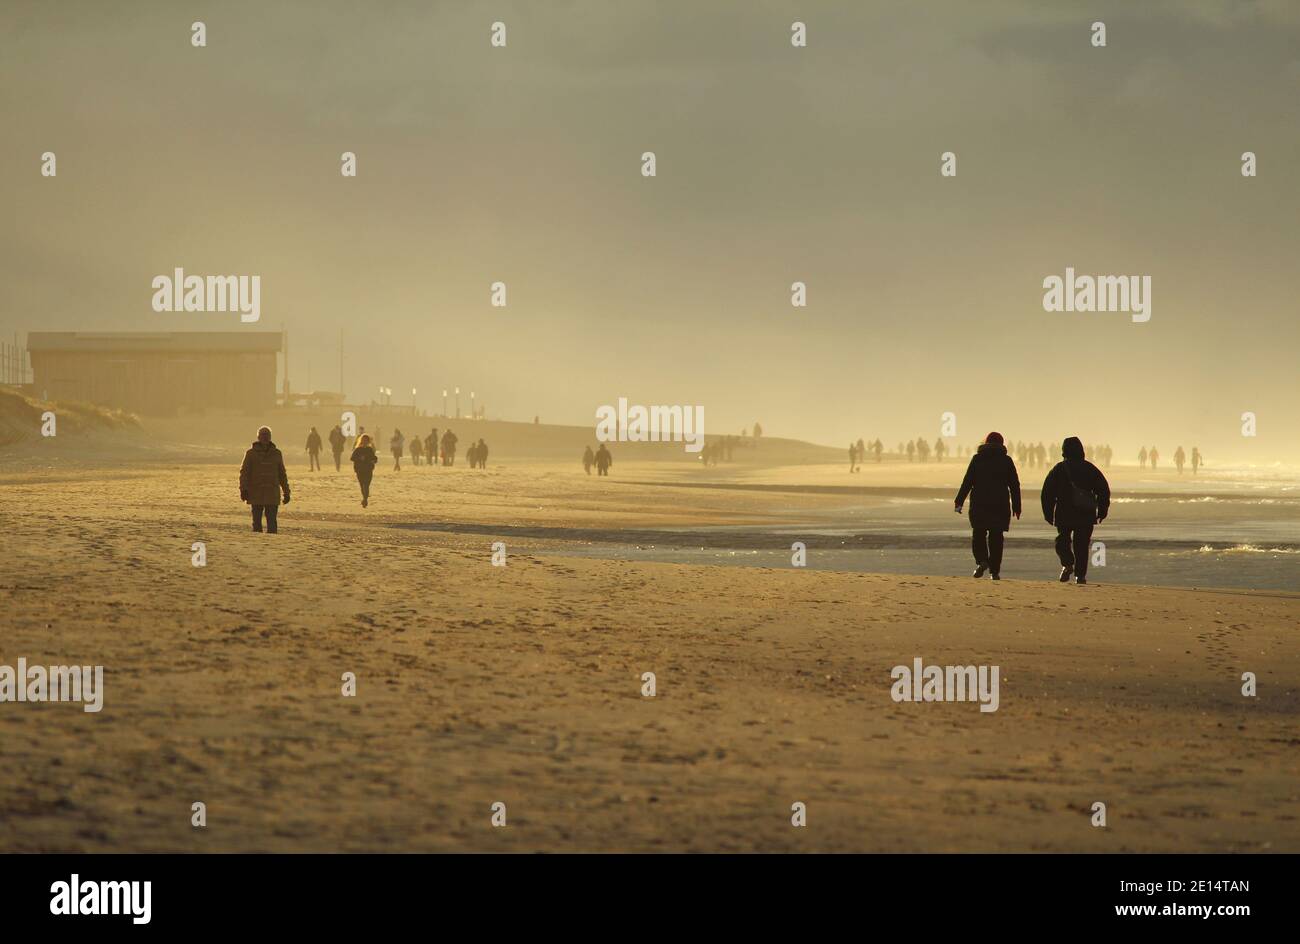 WENDUINE, BELGIUM, 30 DECEMBER 2020: Golden evening light on the beach at Wenduine as people enjoy walking in the fresh air during the Christmas holid Stock Photo